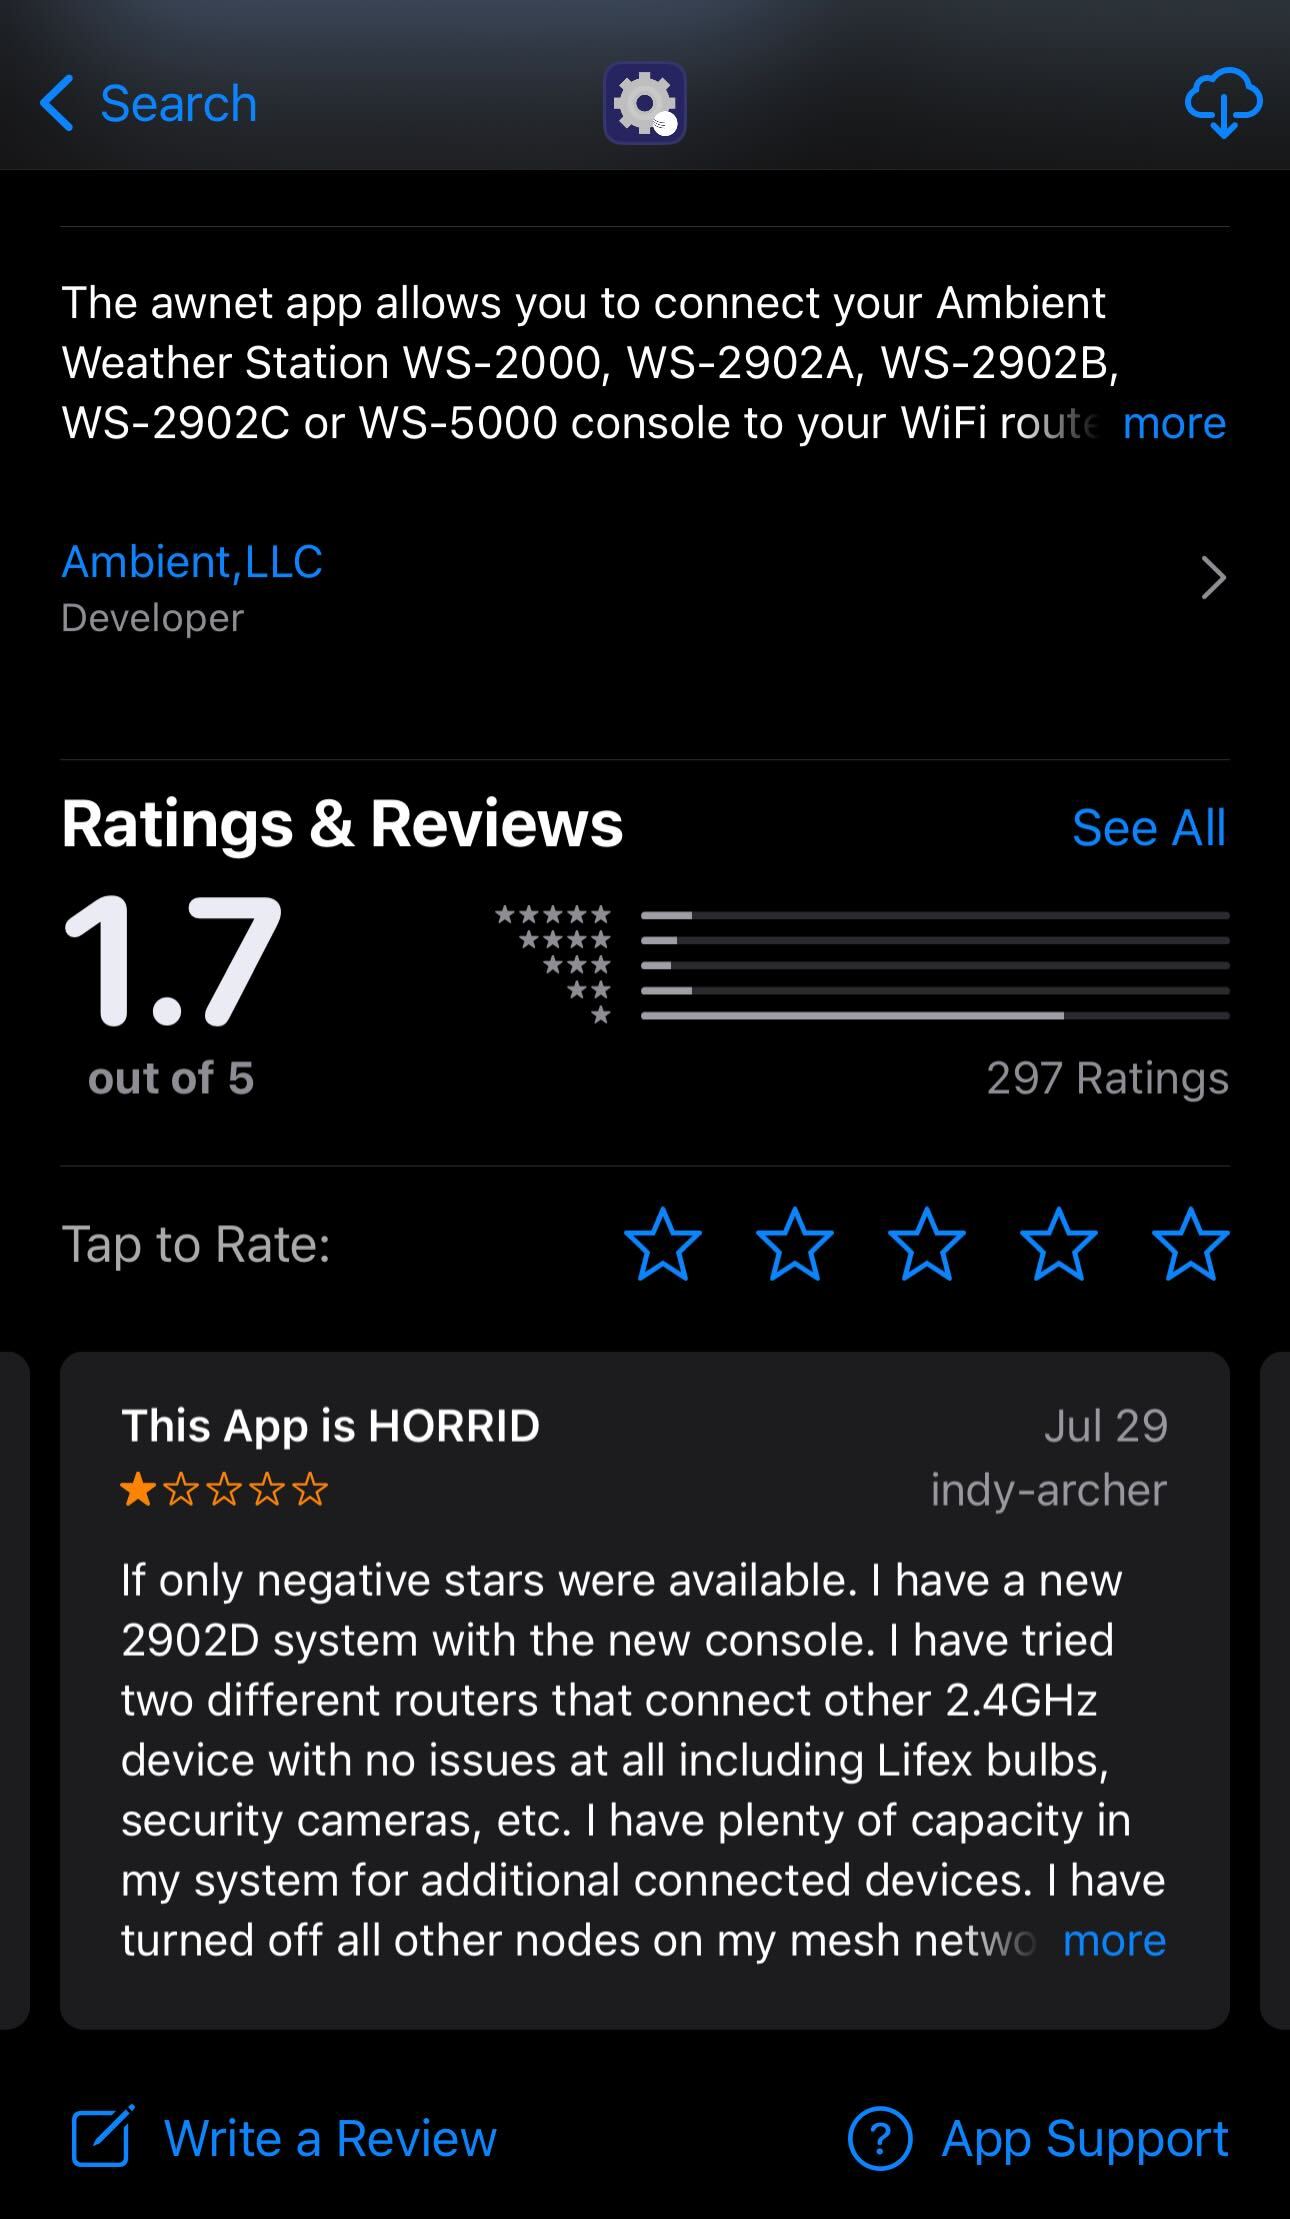 The Ambient Weather app only has 1.7 stars.